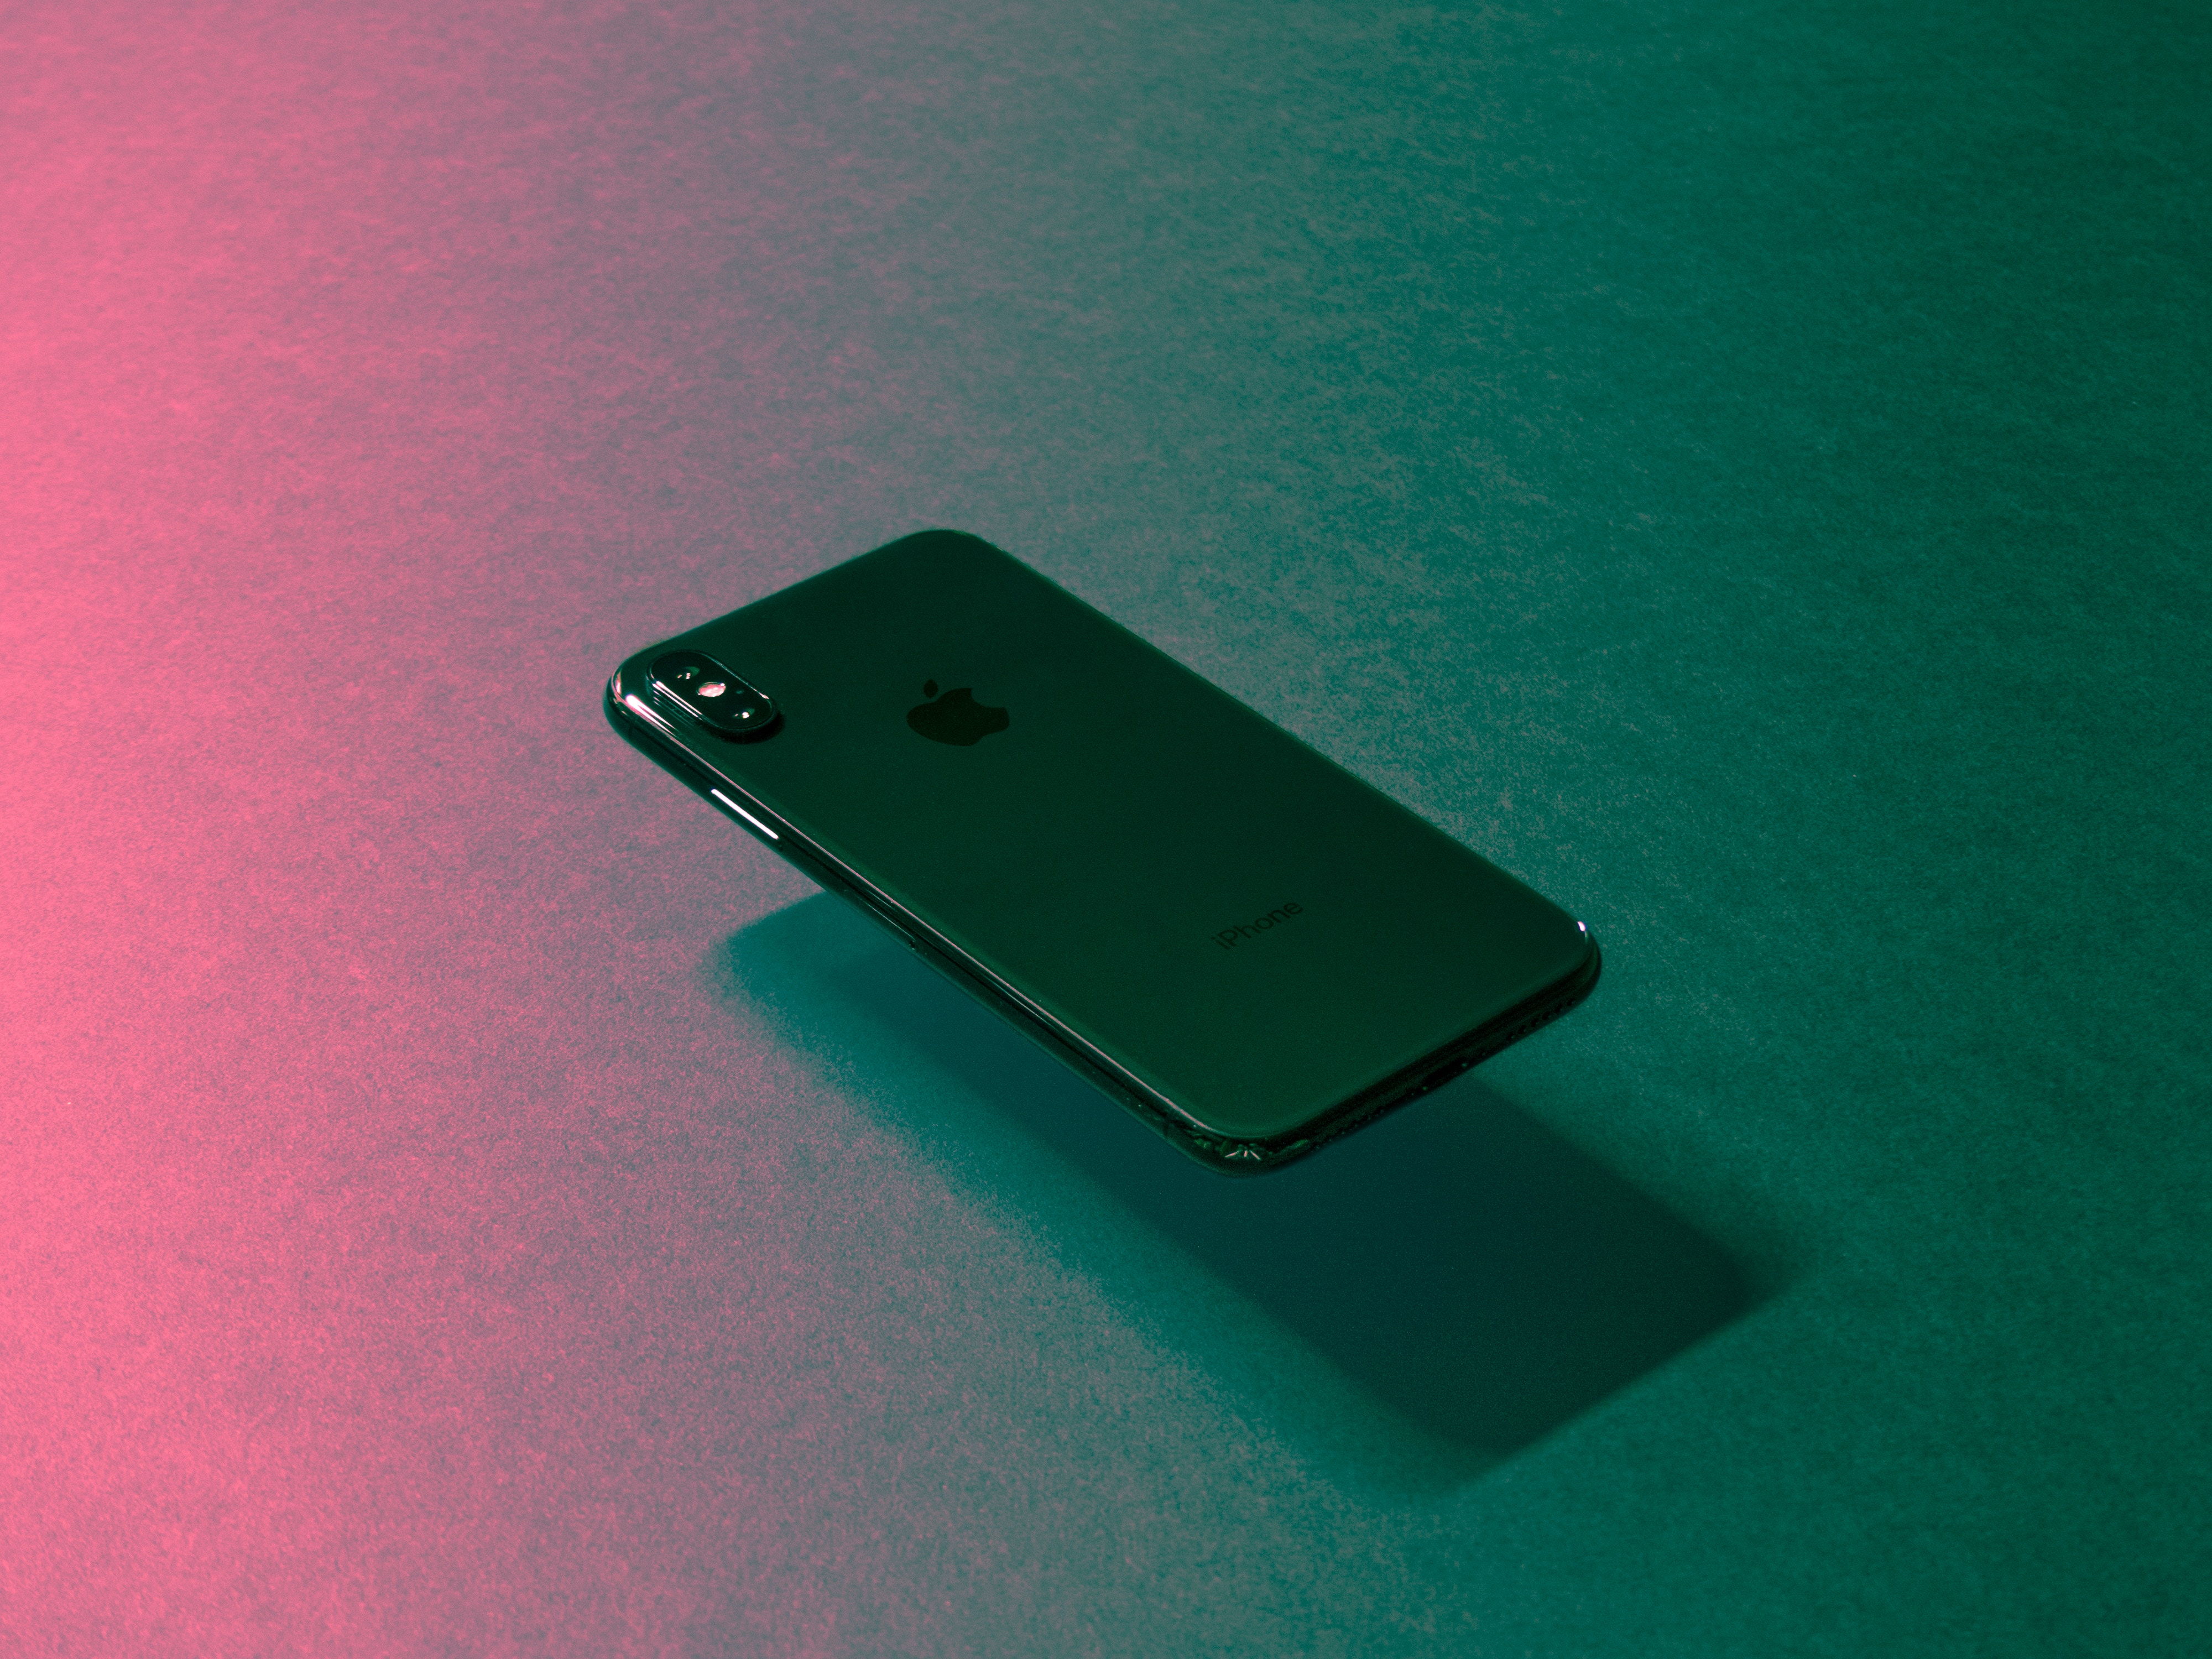 Image of a smartphone with a techno-colored background.